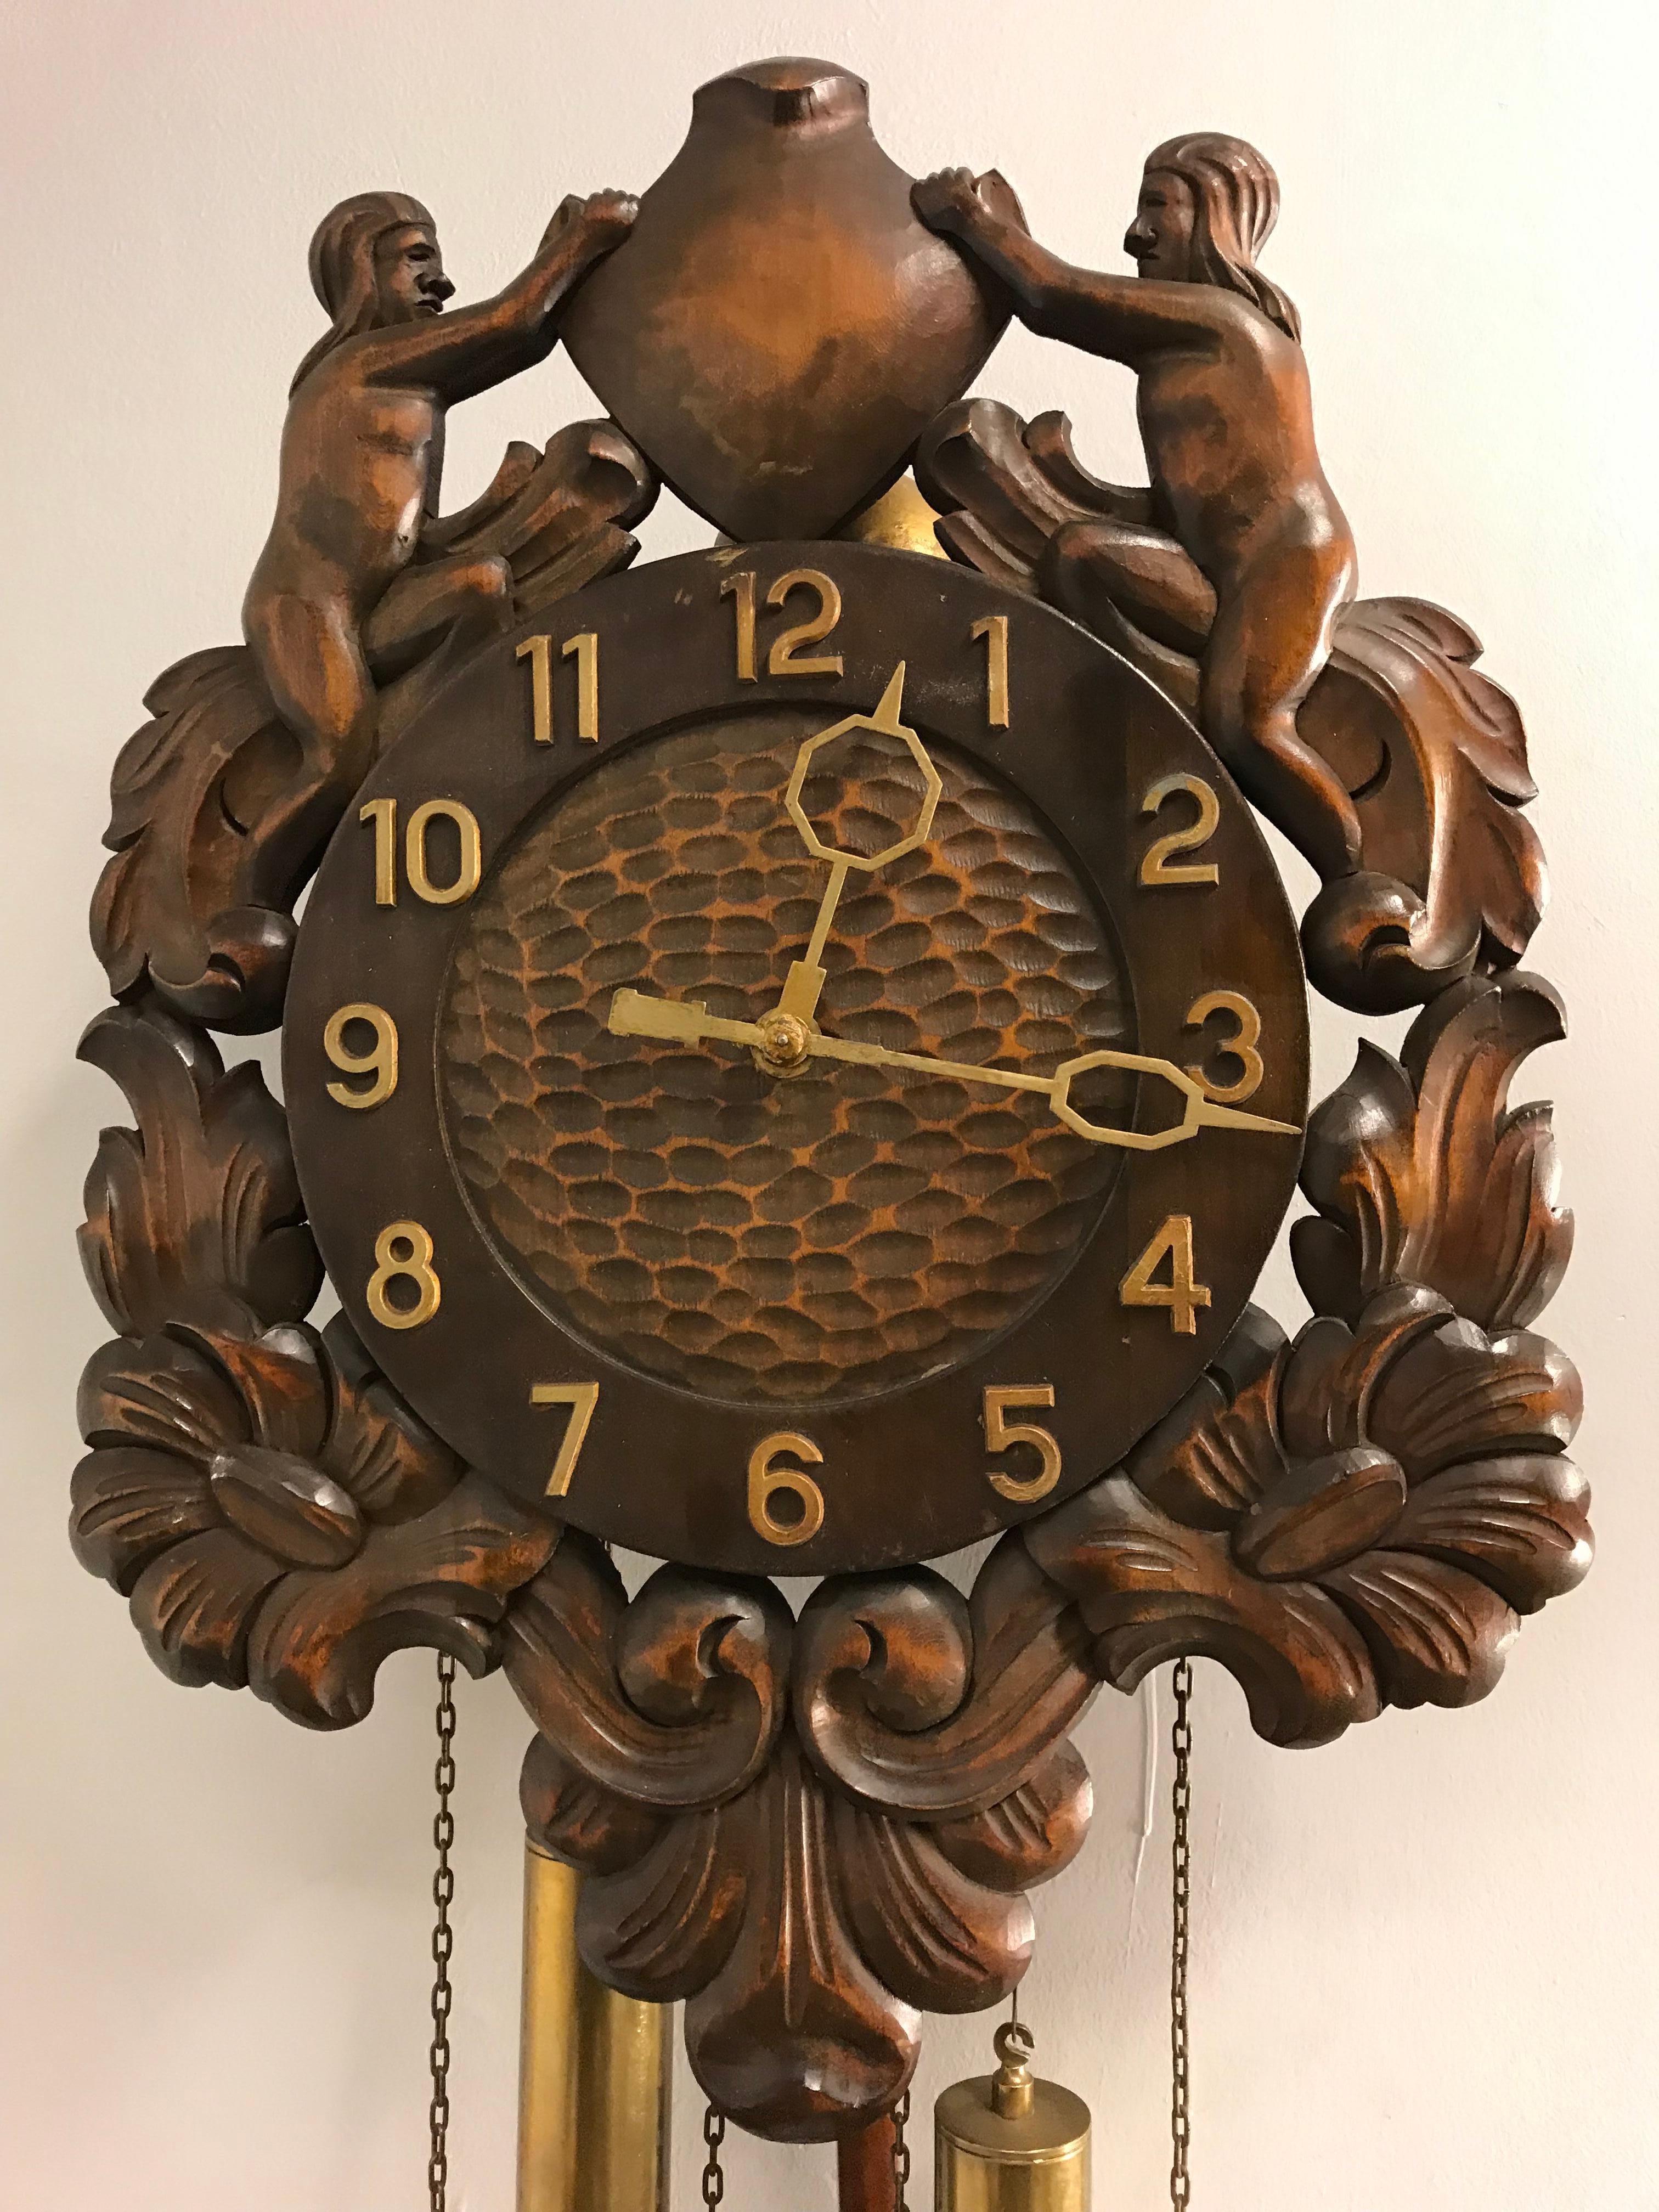 Hand-Crafted Unique Denmark Made Classical Roman Wall Clock with Sculptures and Flowers For Sale